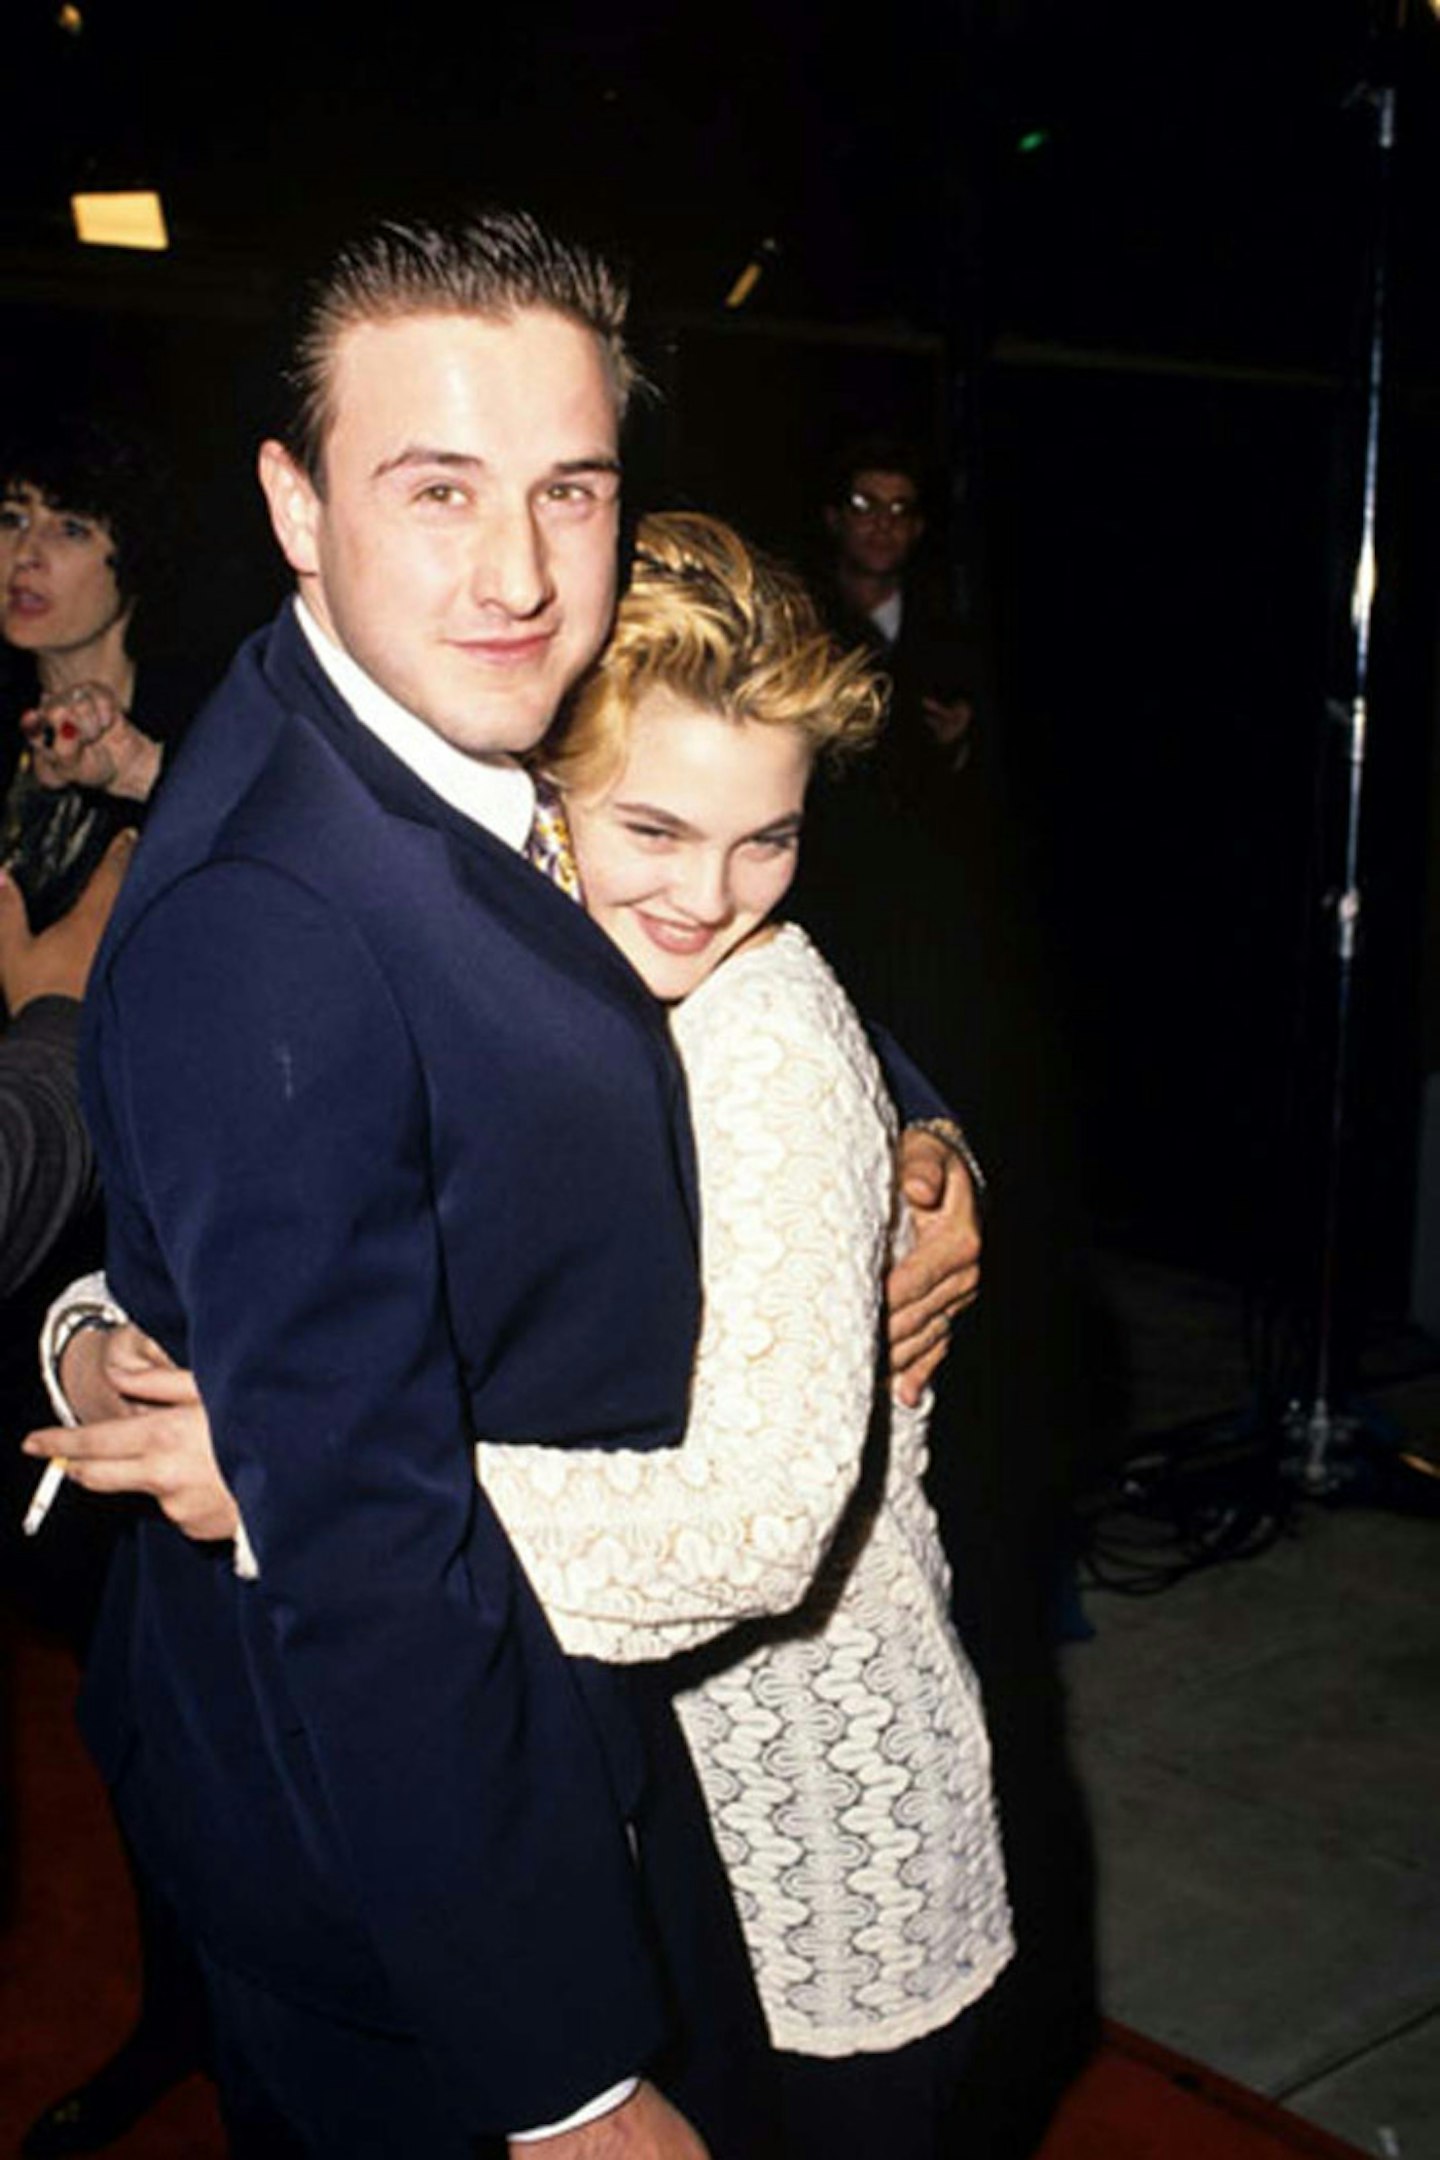 David Arquette and Drew Barrymore